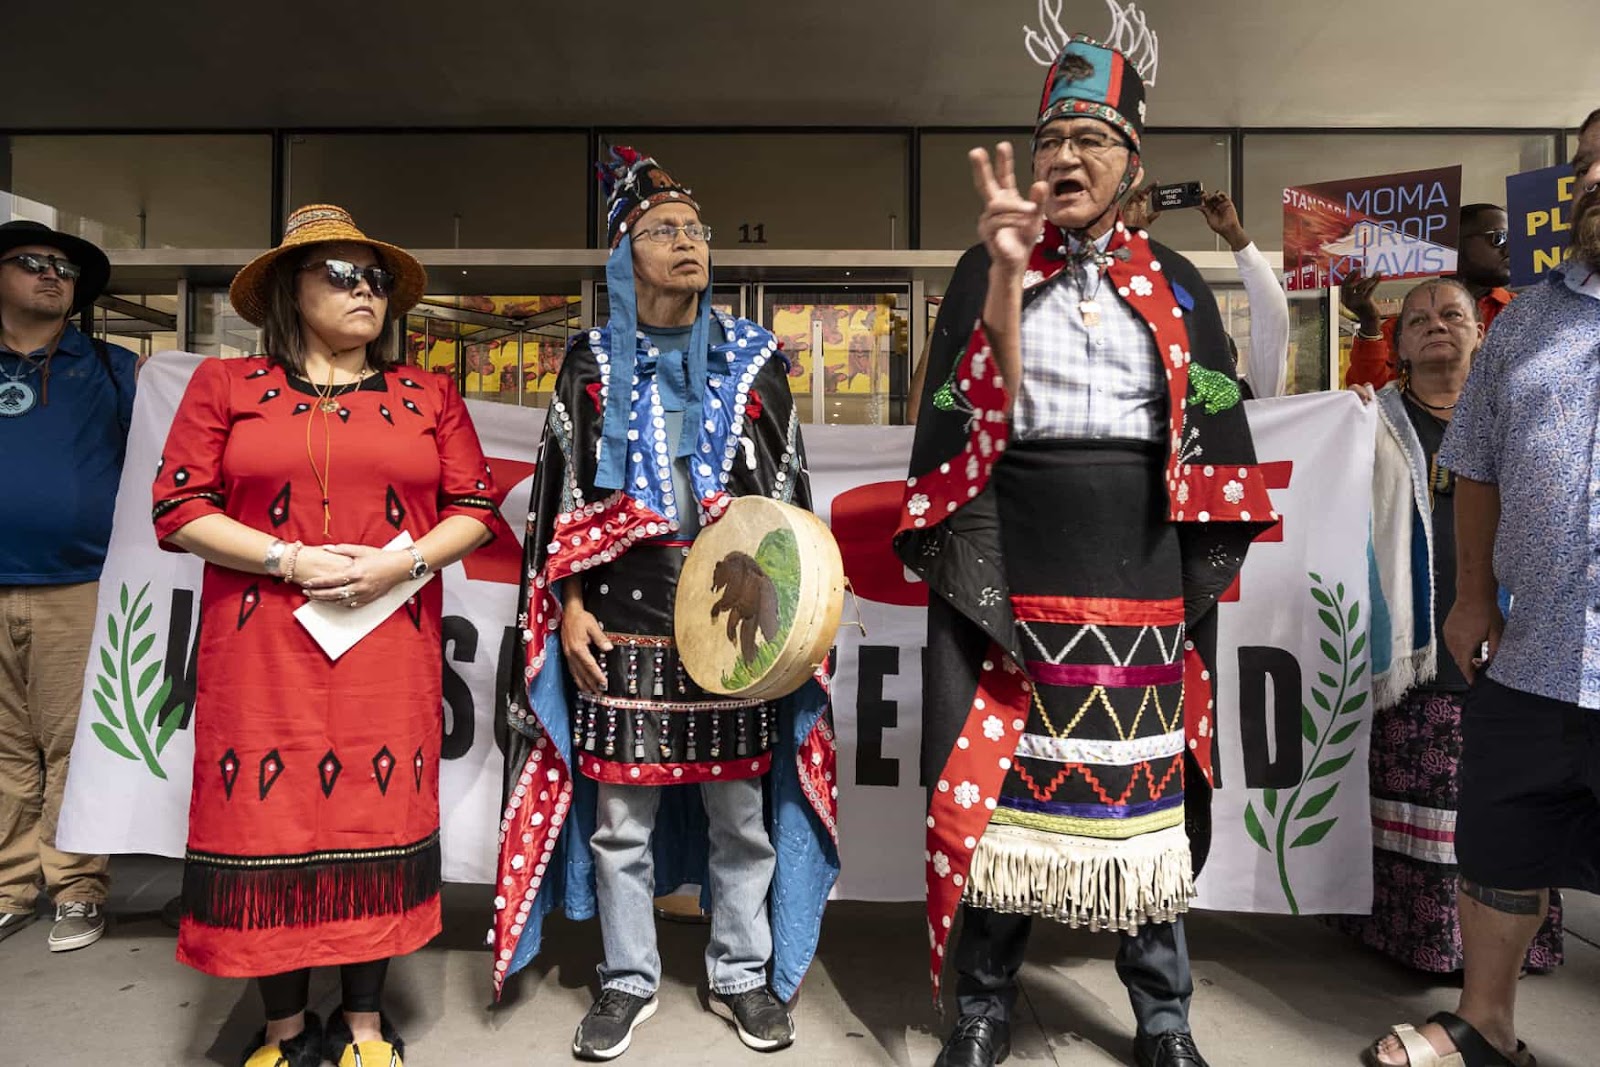 Three indigenous protesters in traditional dress address an unseen crowd